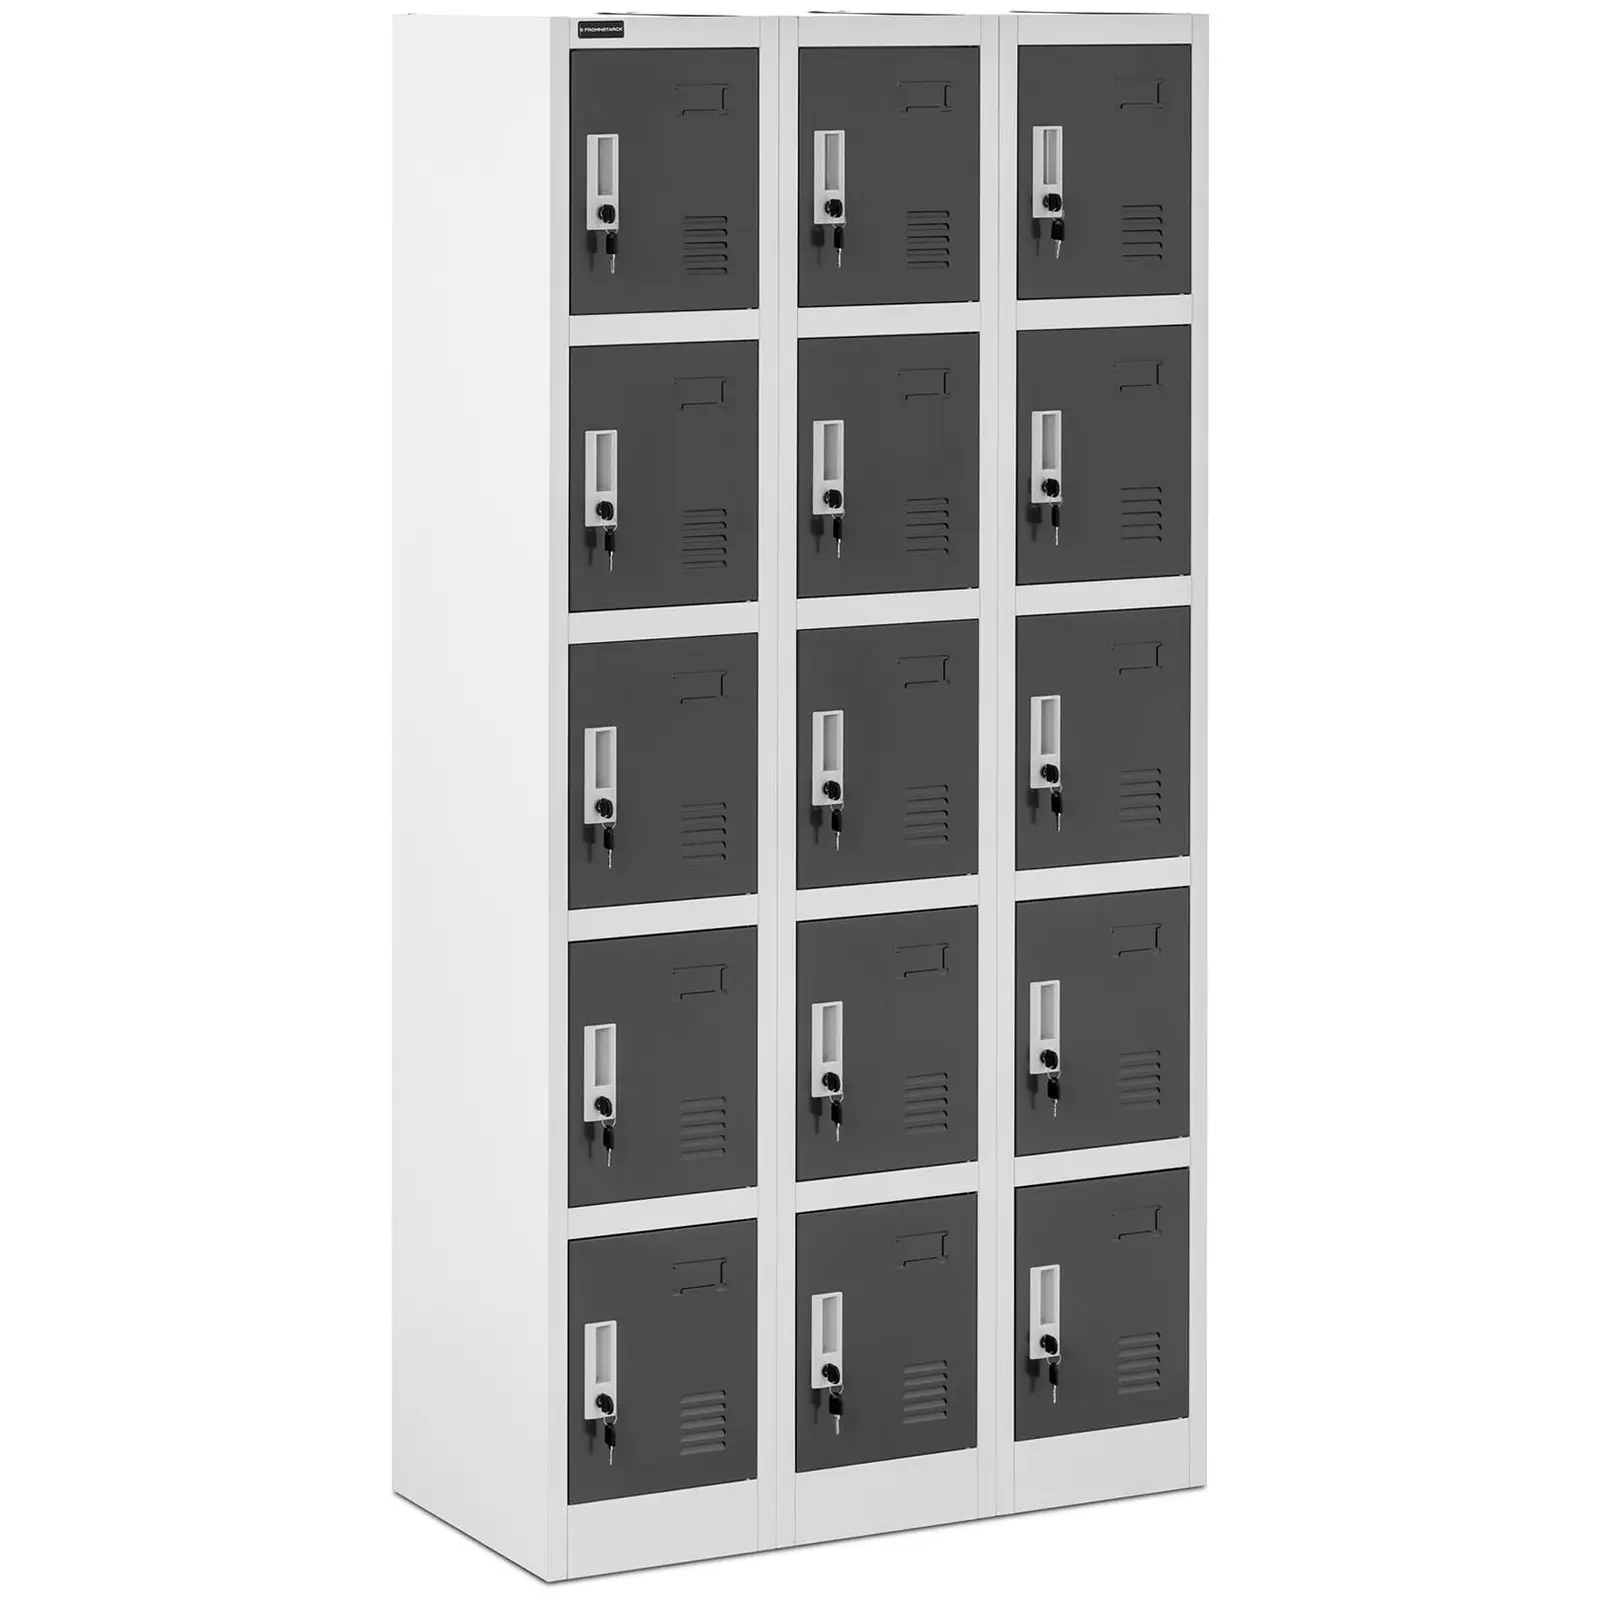 Storage lockers for staff, offices and industry